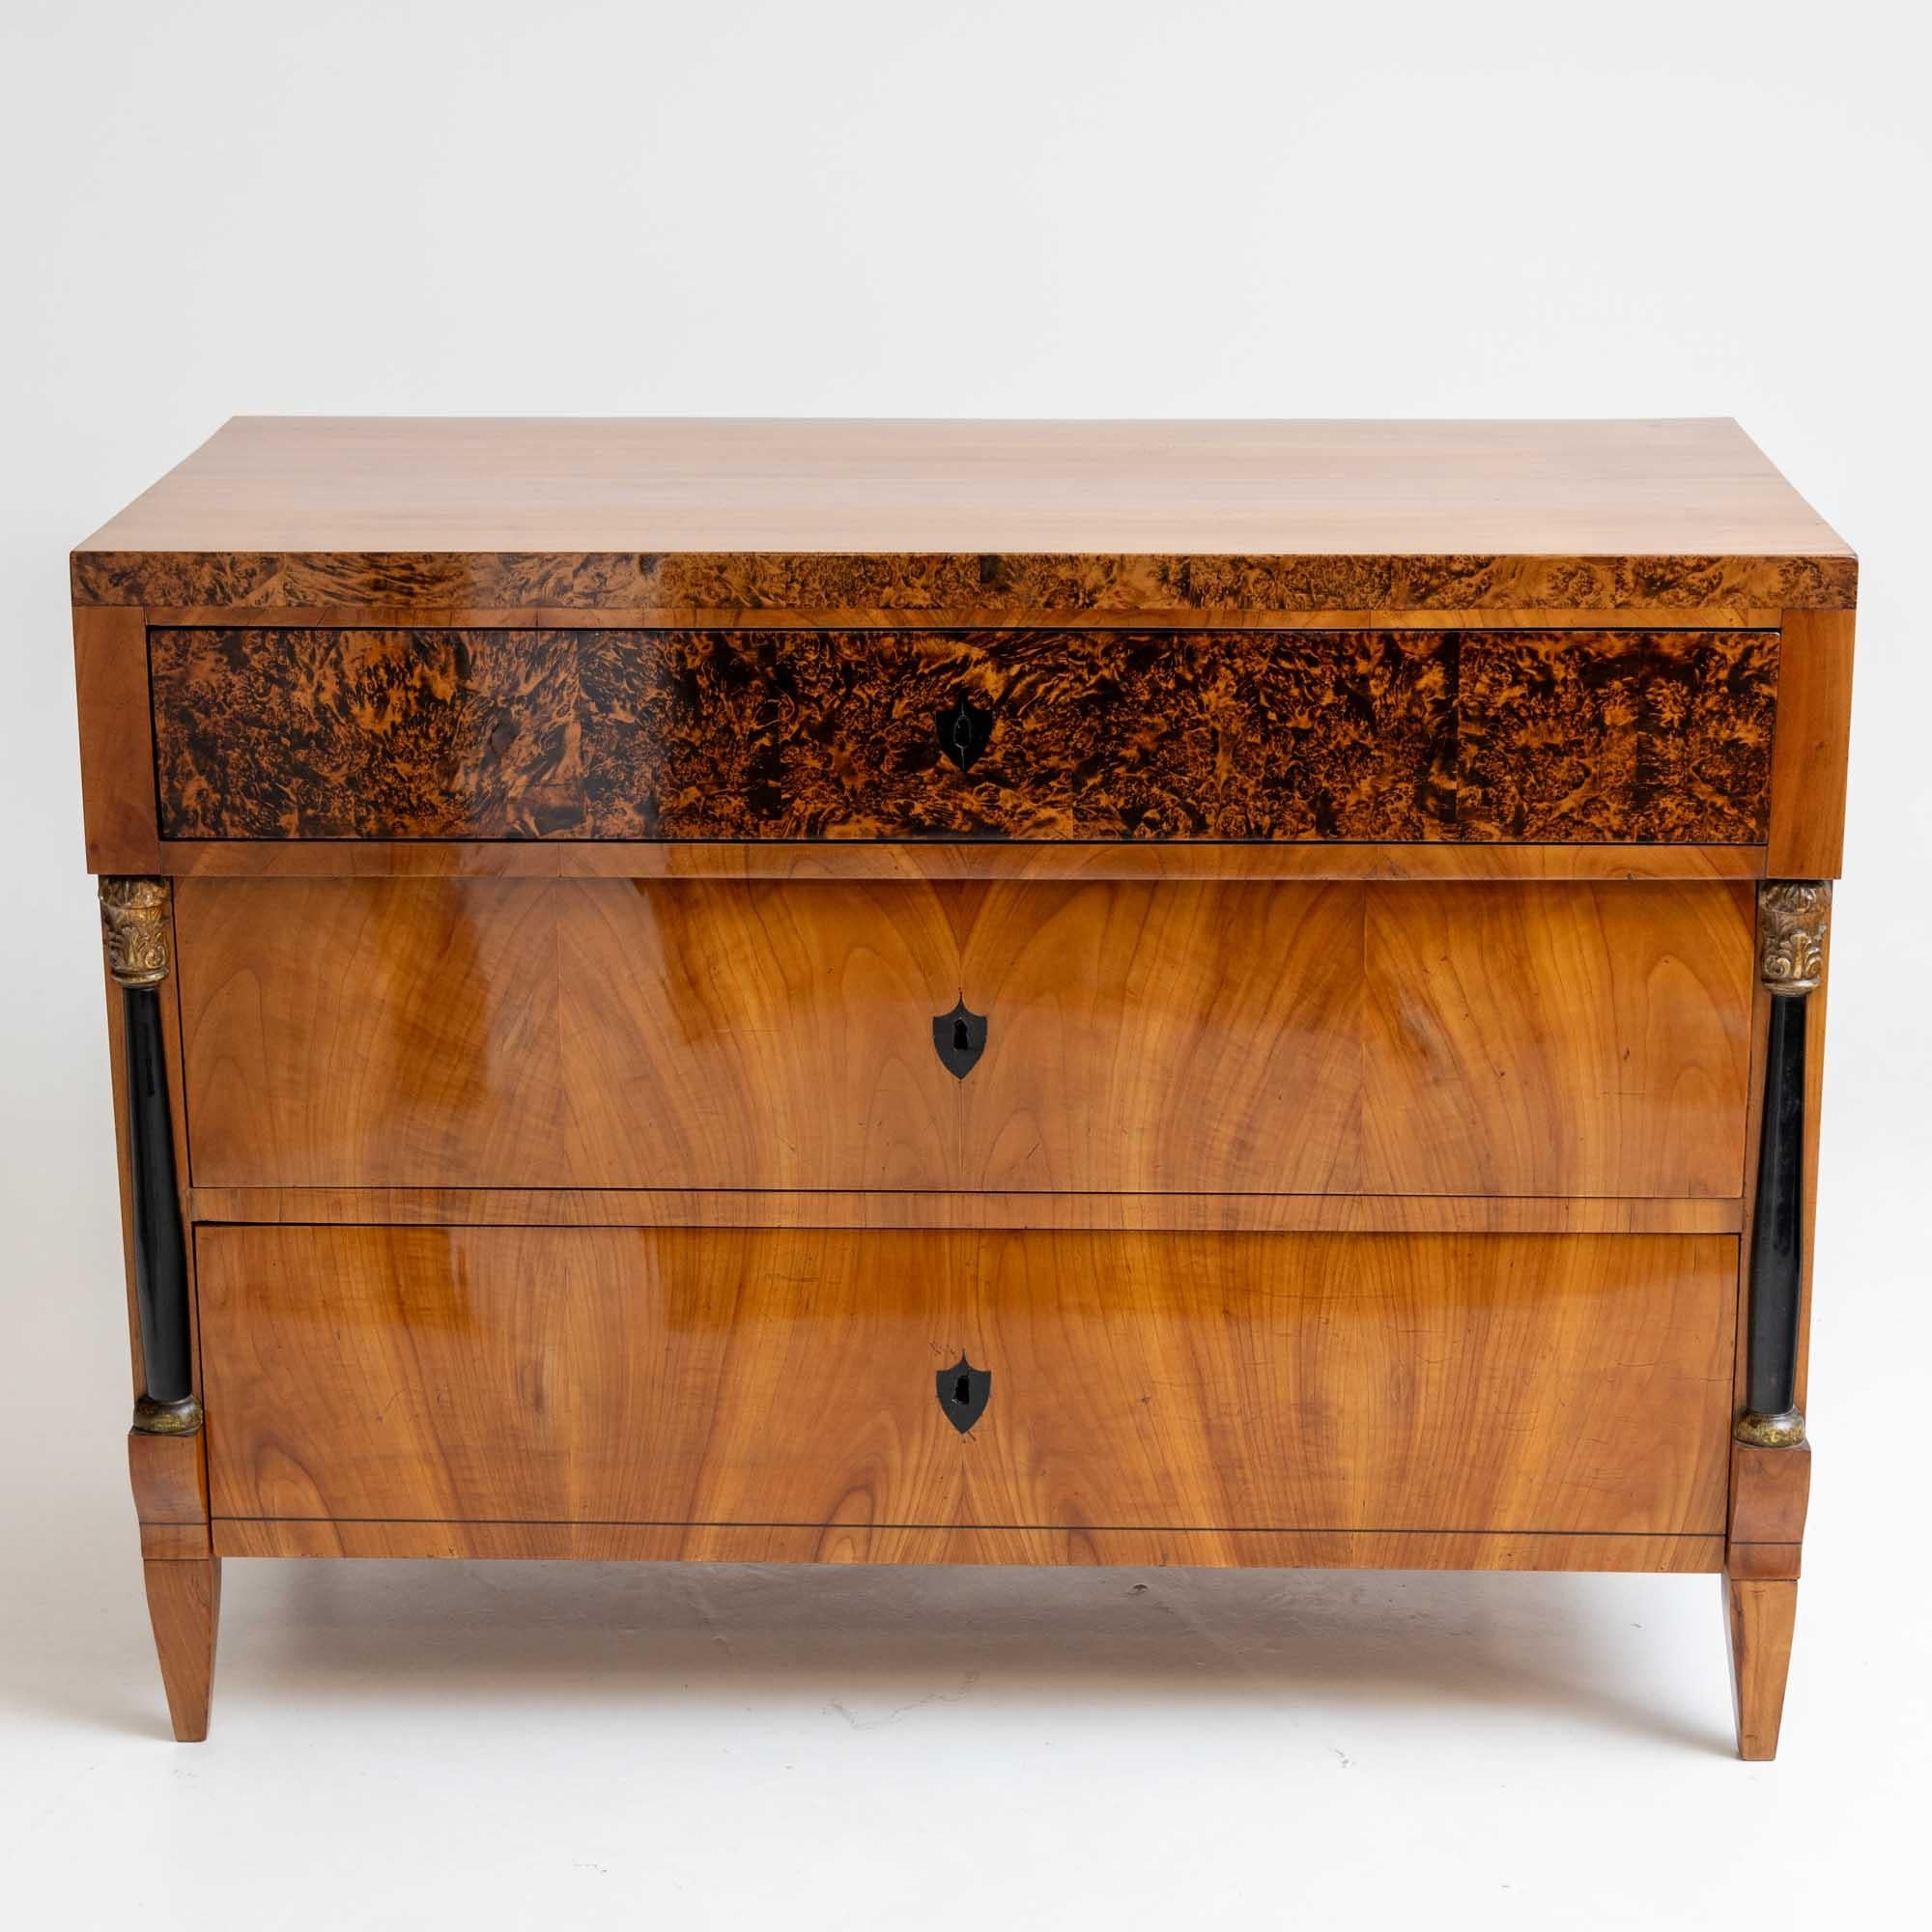 Biedermeier chest of drawers crafted from cherry wood and adorned with burl inlays. The key plates take the form of ebonized shields. Ebonized half-columns with gold-patinated capitals and bases flank the two lower drawers, adding a touch of